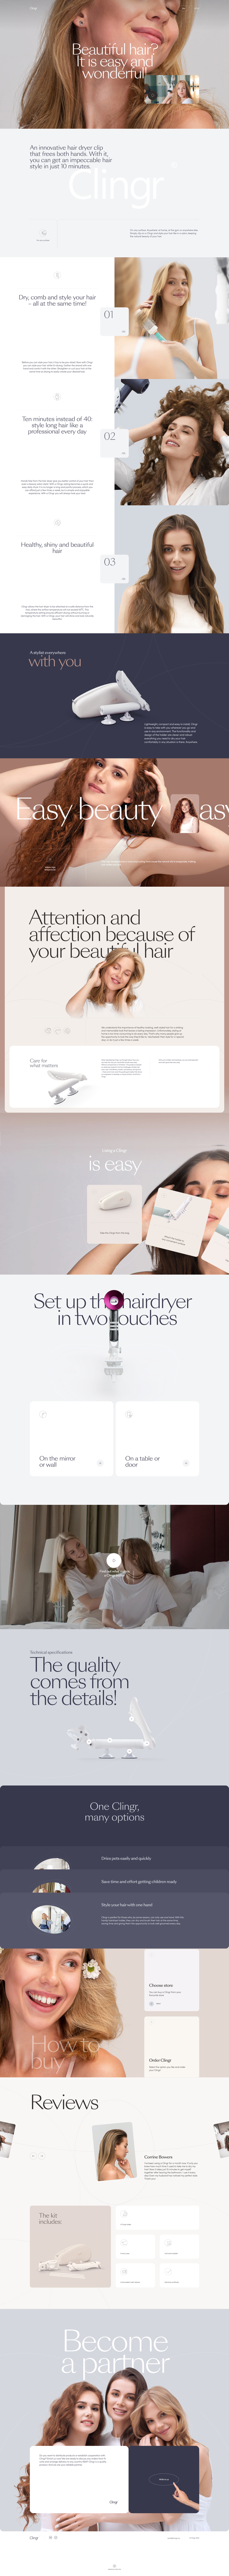 Clingr Landing Page Example: Beautiful hair? It is easy and wonderful! An innovative hair dryer clip that frees both hands. Wit hit,you can get an impeccable hair style in just 10 minutes.